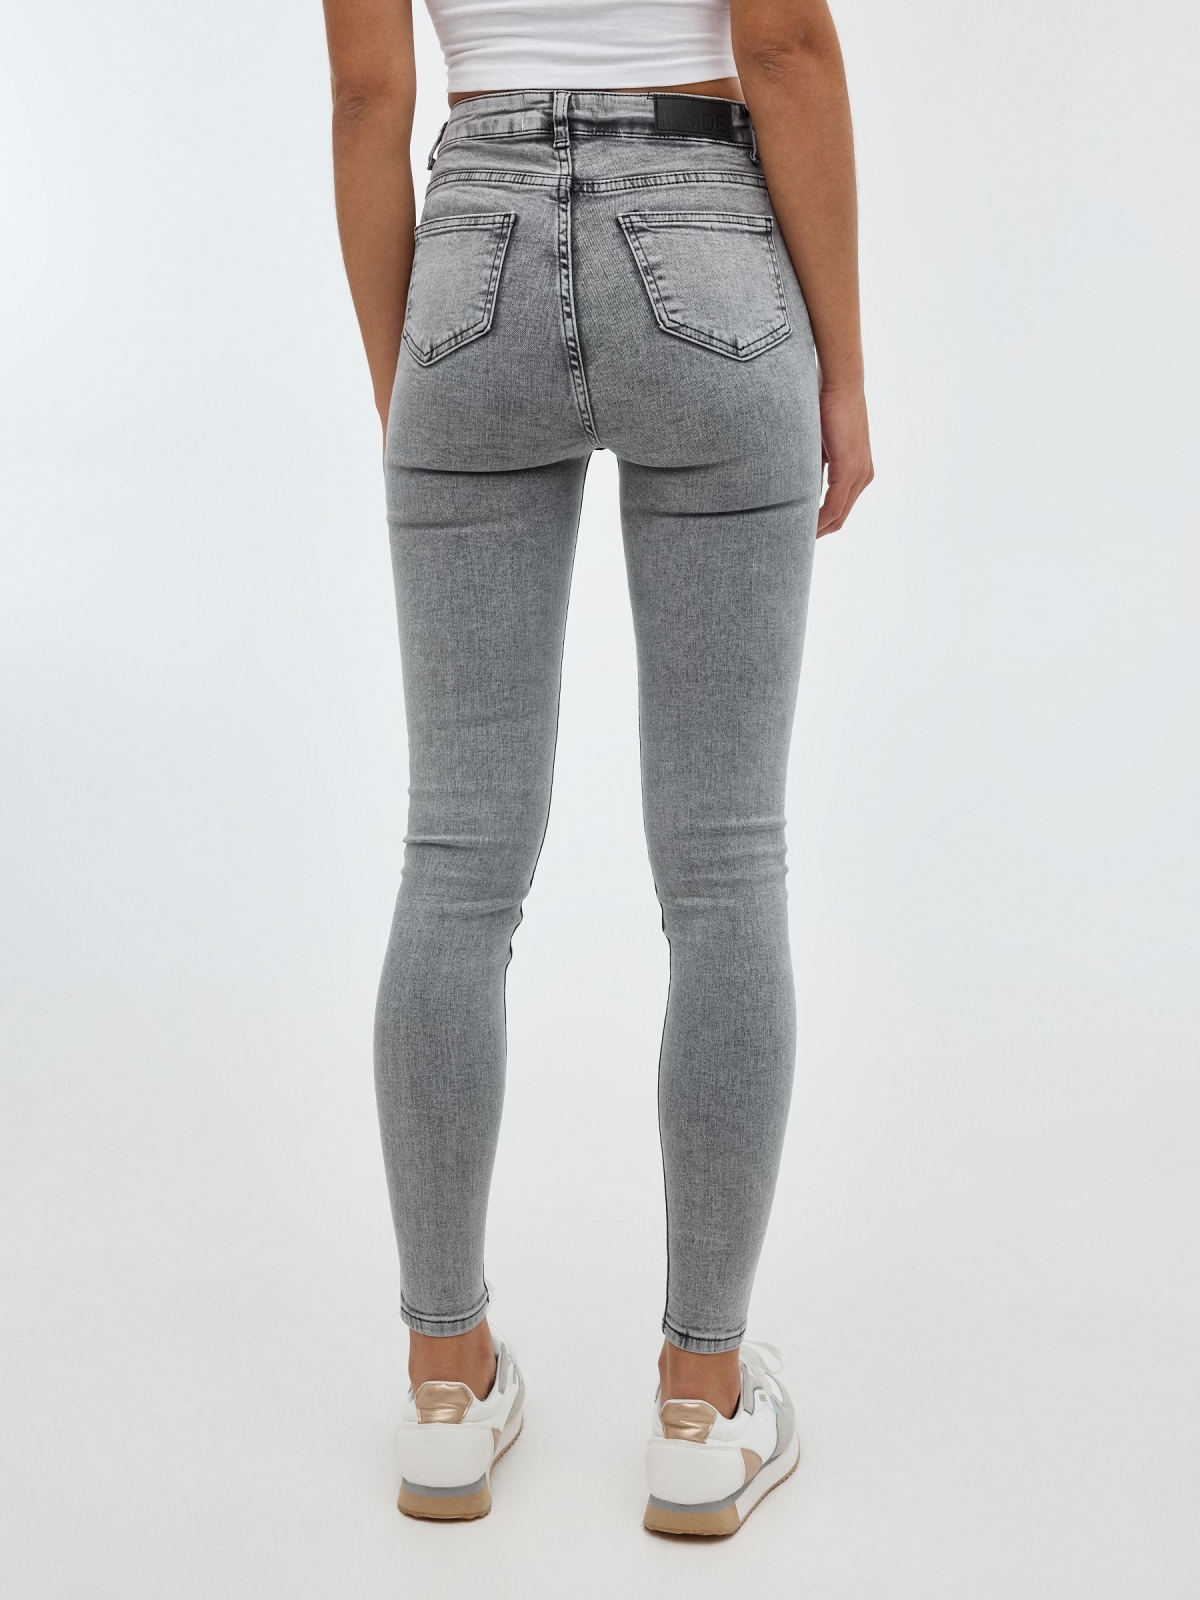 Grey skinny jeans medium grey middle back view